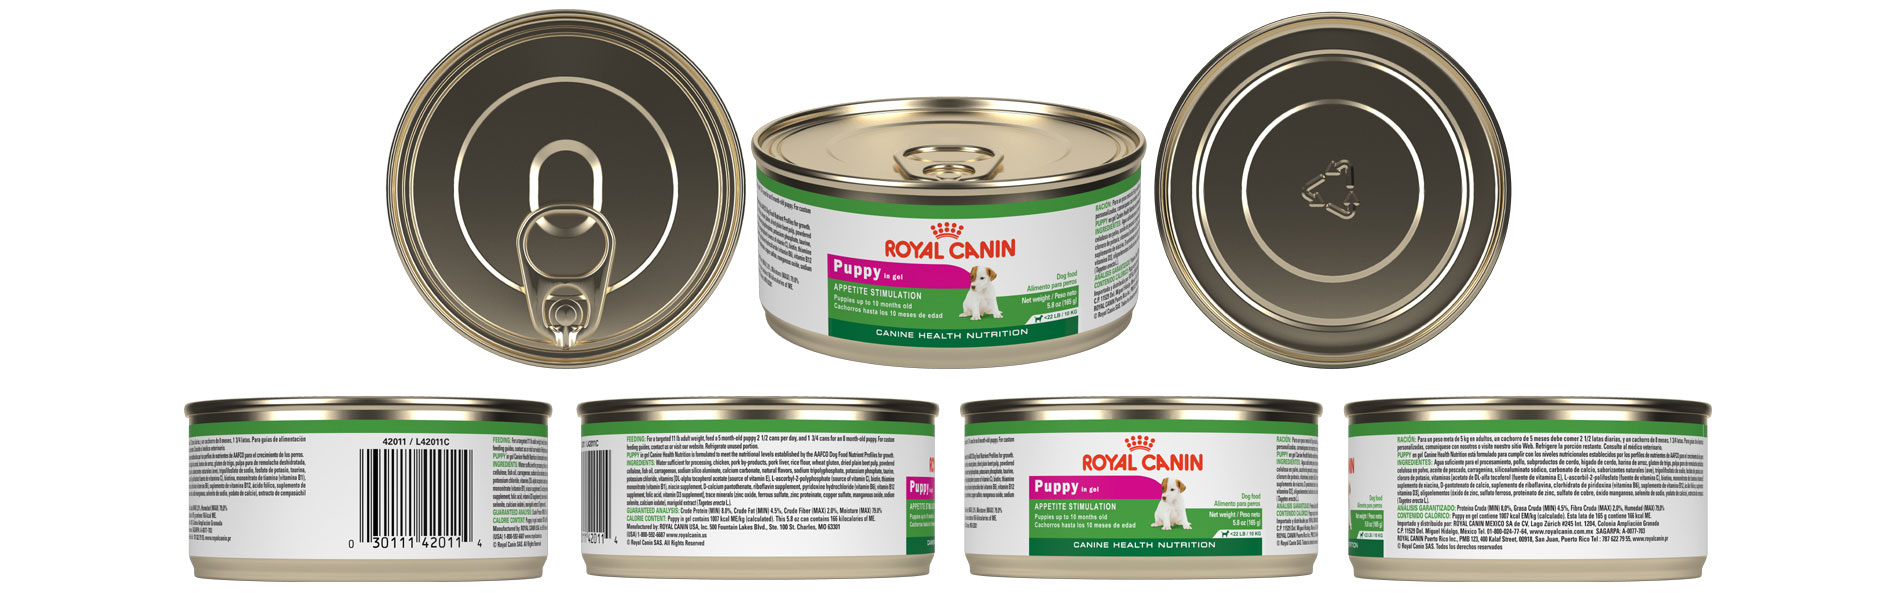 cpg rendering of cans of catfood